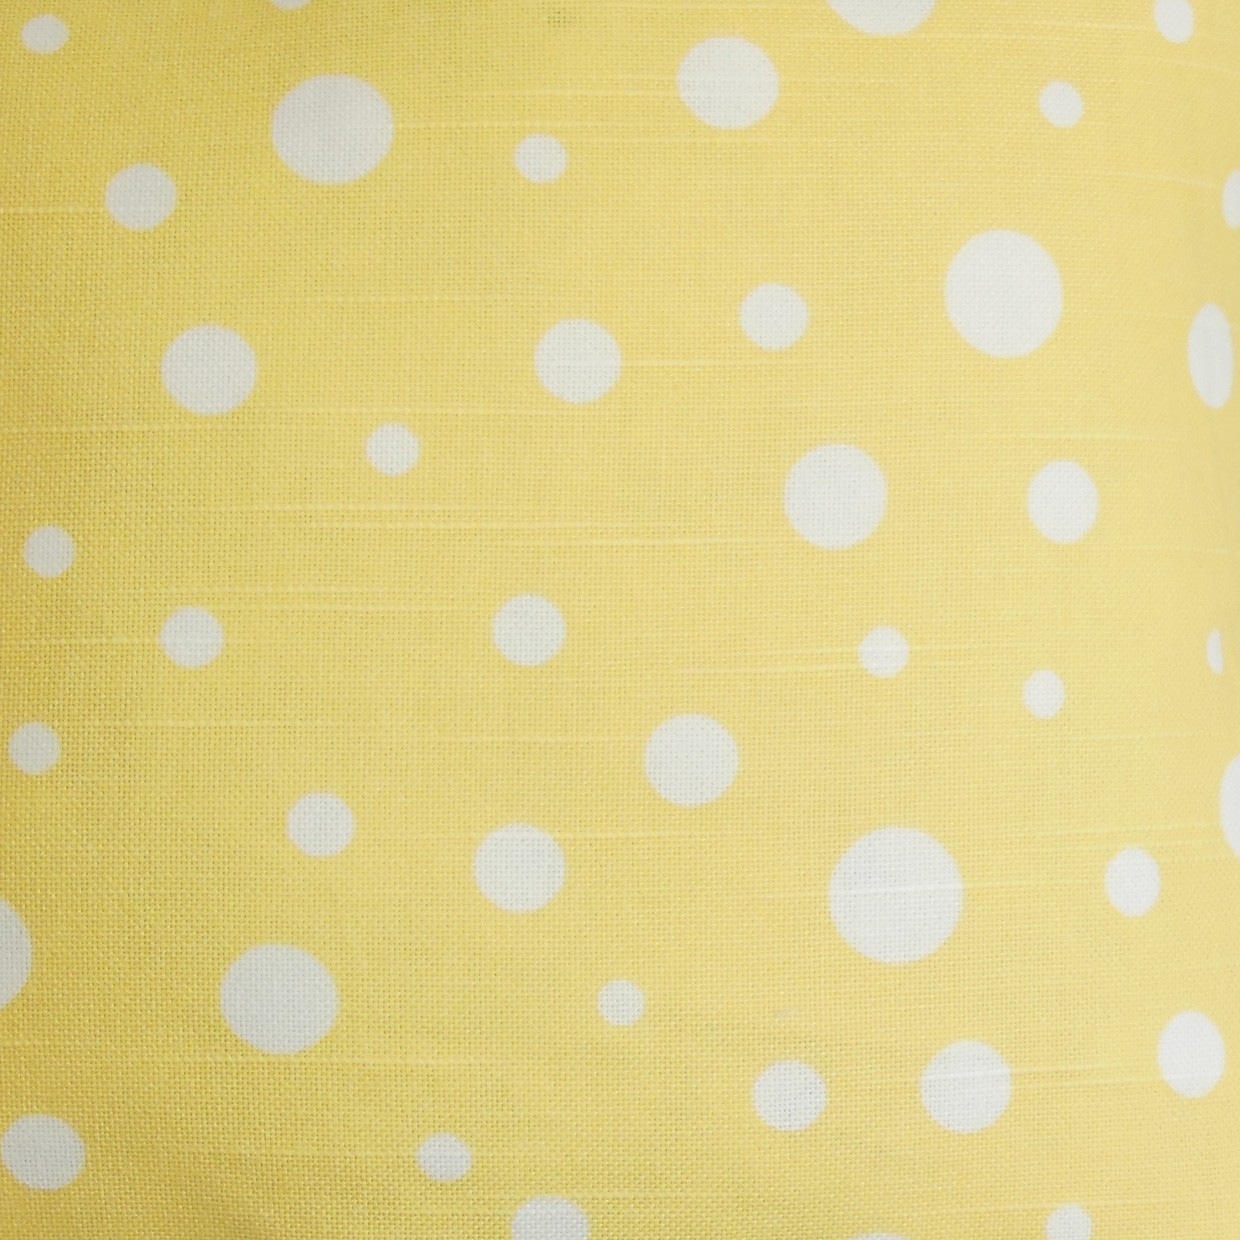 Bebe Polka Dots Pattern Yellow White- 20'' x 20''-Polyester insert included - Image 1